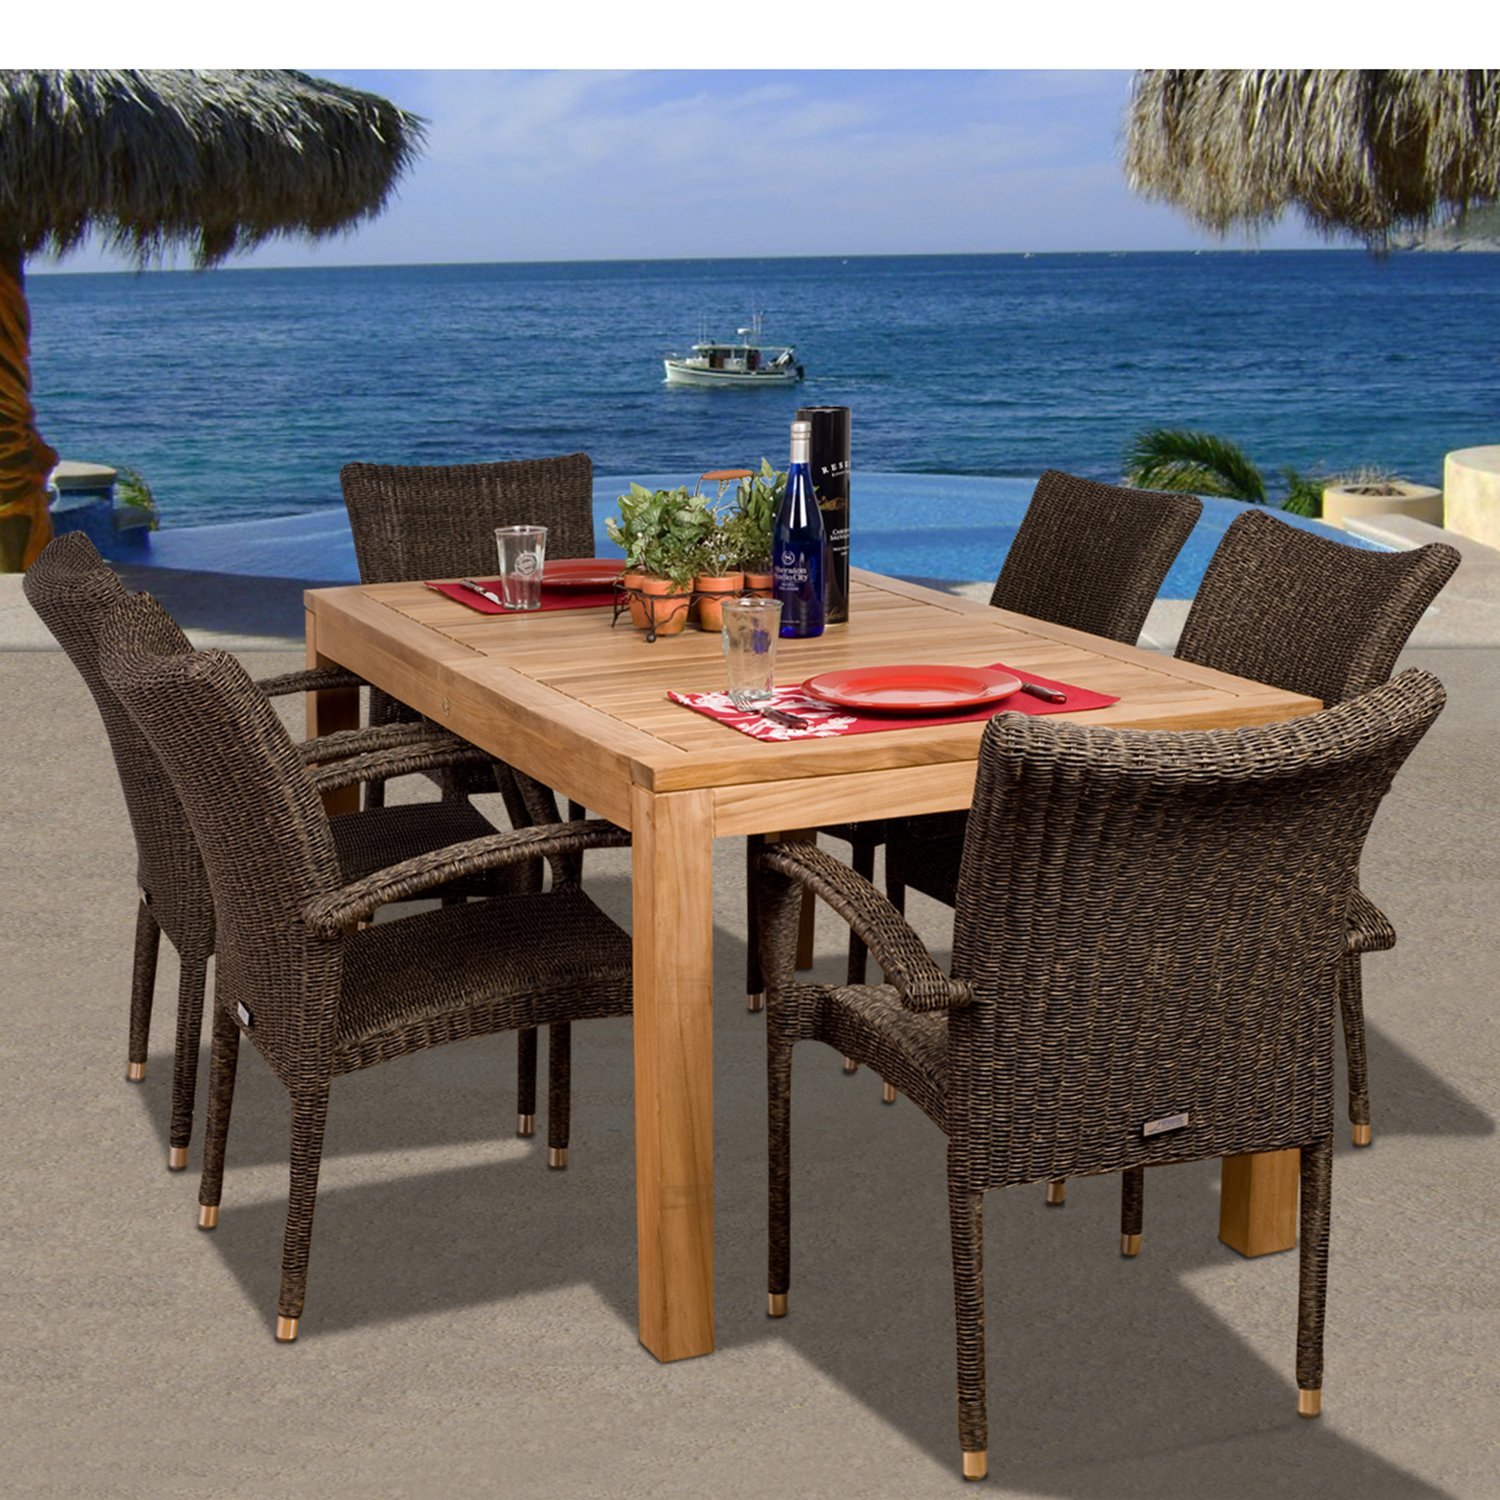 Tips for Choosing a Gorgeous Teak Dining Table